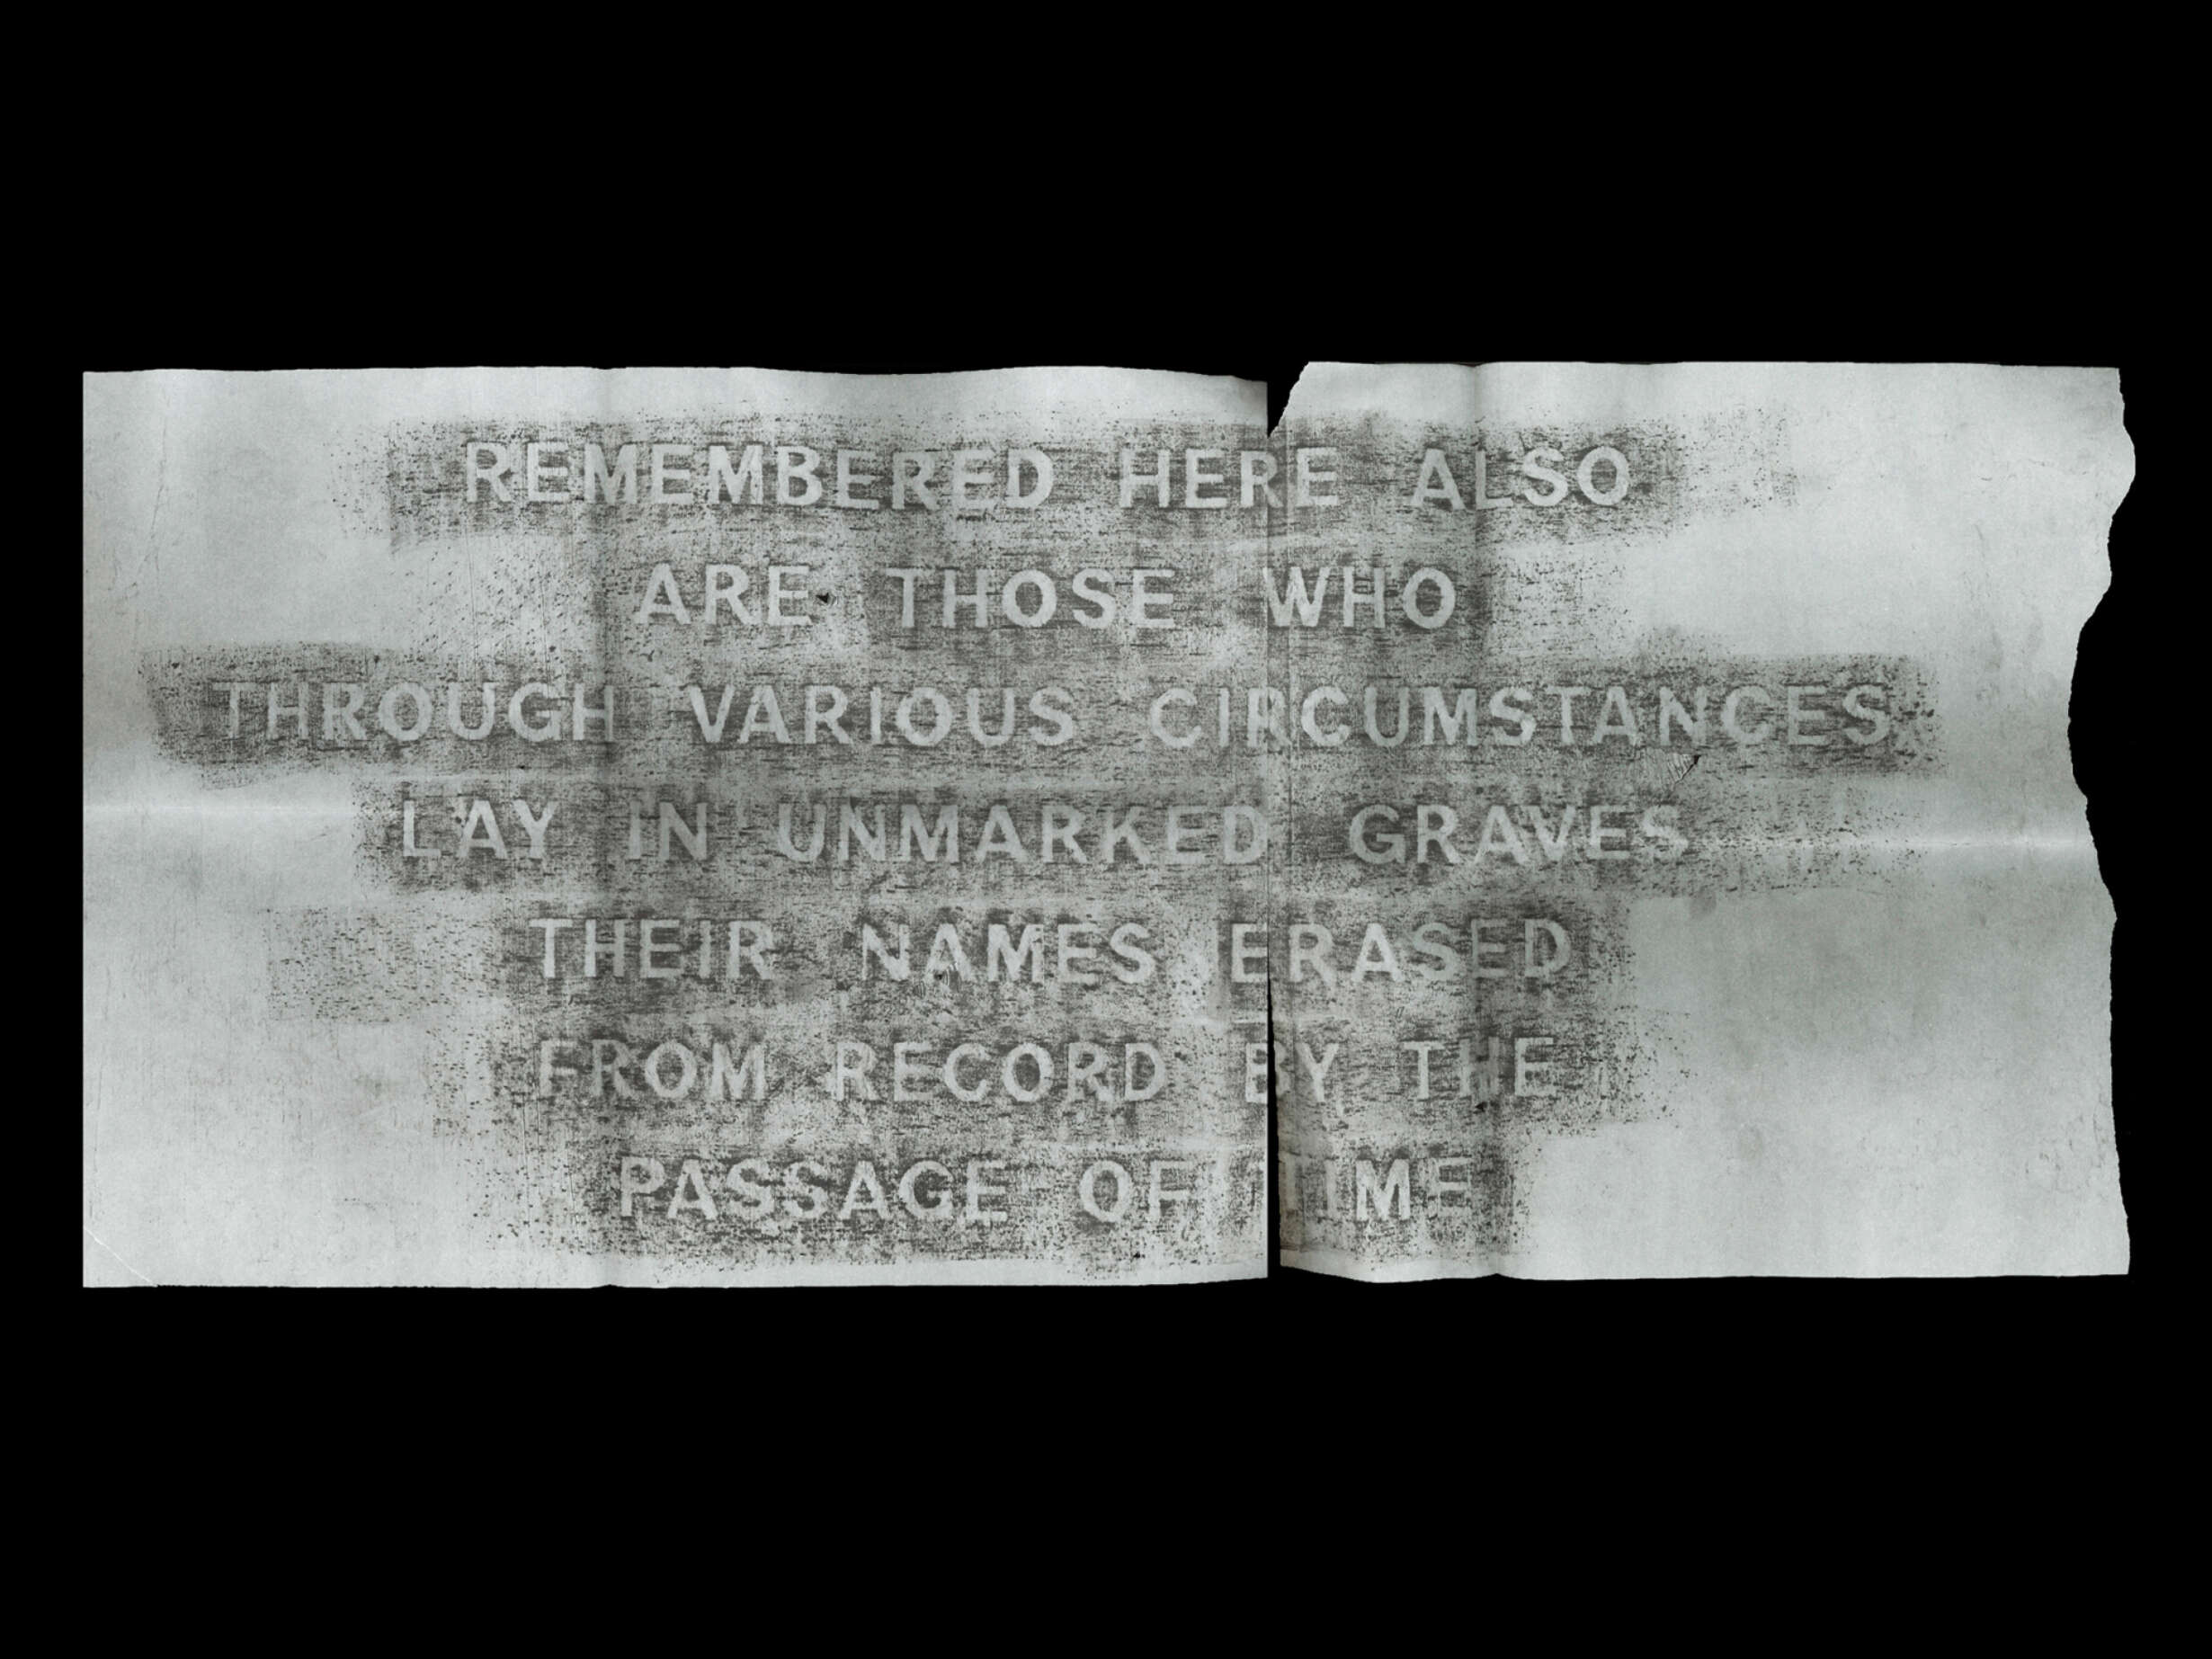 Rubbing of the mass memorial, corner of Symonds Street and Karangahape Road, that commemorates the graves disturbed by the motorway. Charcoal on newsprint, 690x297mm.